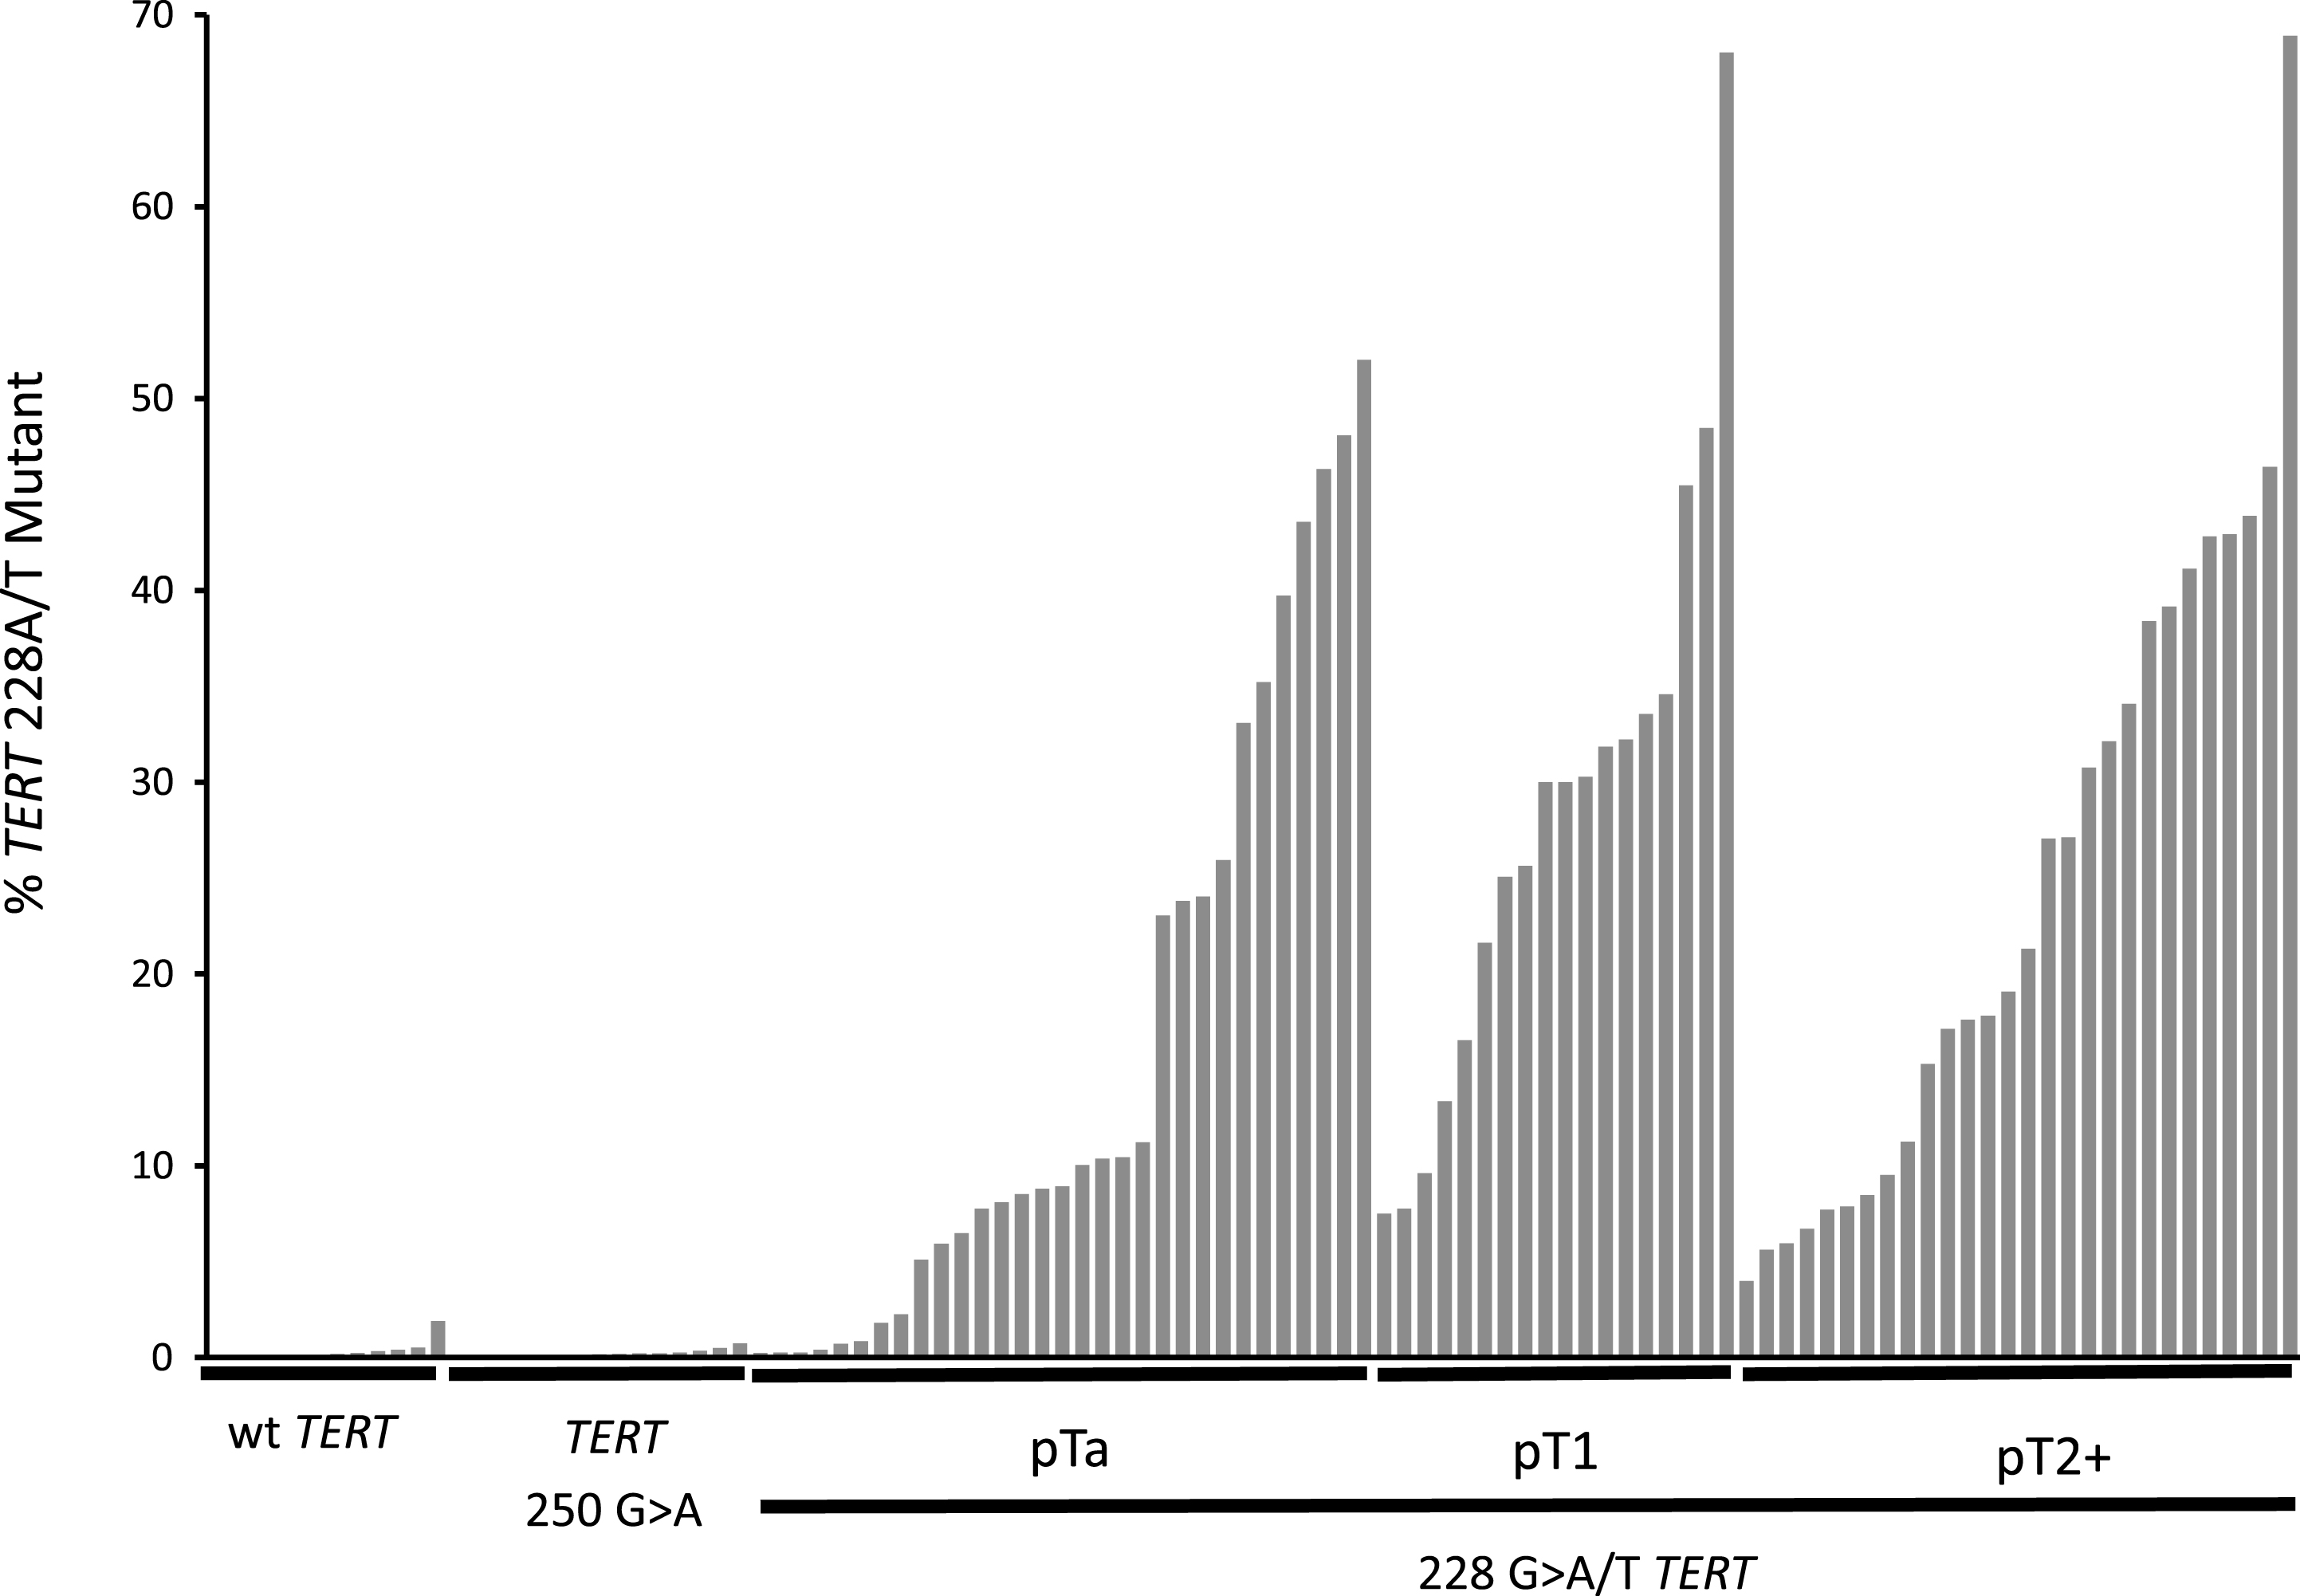 TERT 228 G>A/T mutant allele frequencies in the cfDNA of 104 UBC patients. The mutant allele frequency for each patient in the study is represented by a single bar. Patients are sorted within each group by mutant allele frequency. The groups are: UBCs with wt TERT promotor, UBCs with TERT 250 G>A mutant promotor and UBCs with TERT G > 228A/T separated into pTa, pT1 and pT2 + disease.